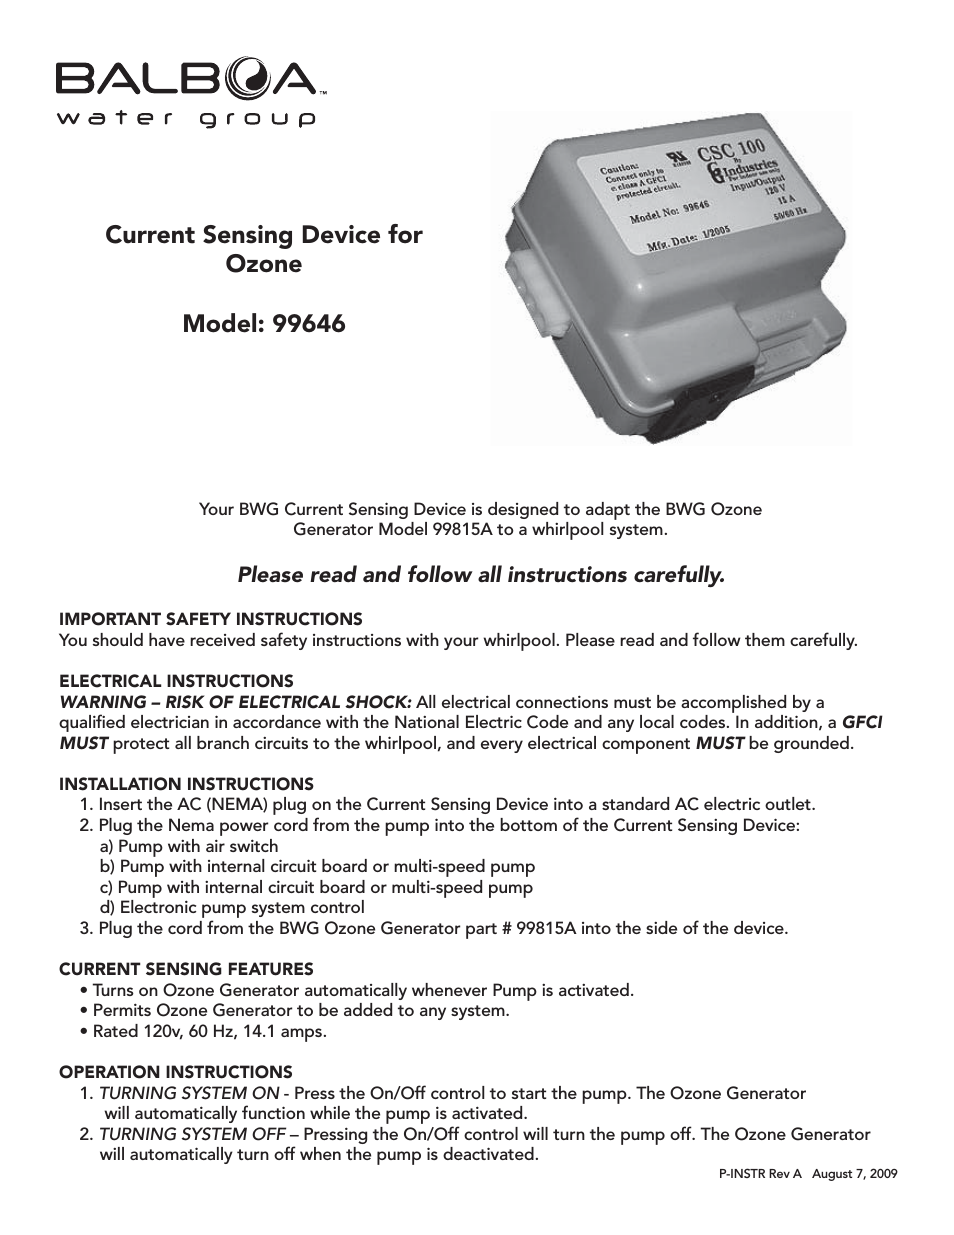 Current Sensing Device for Ozone, 99646